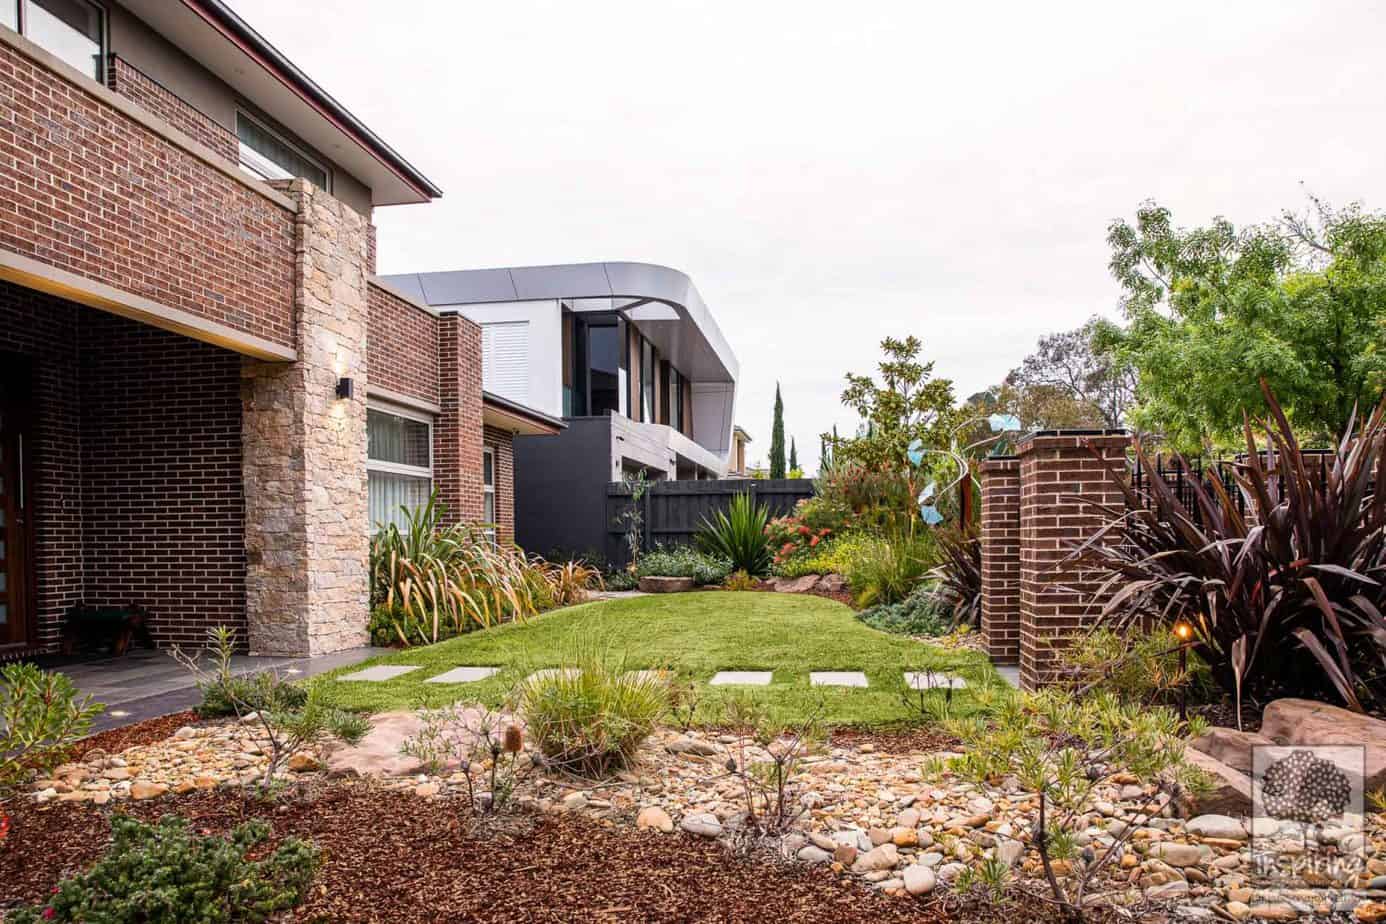 Side view of Glen Waverley front garden using largely native planting